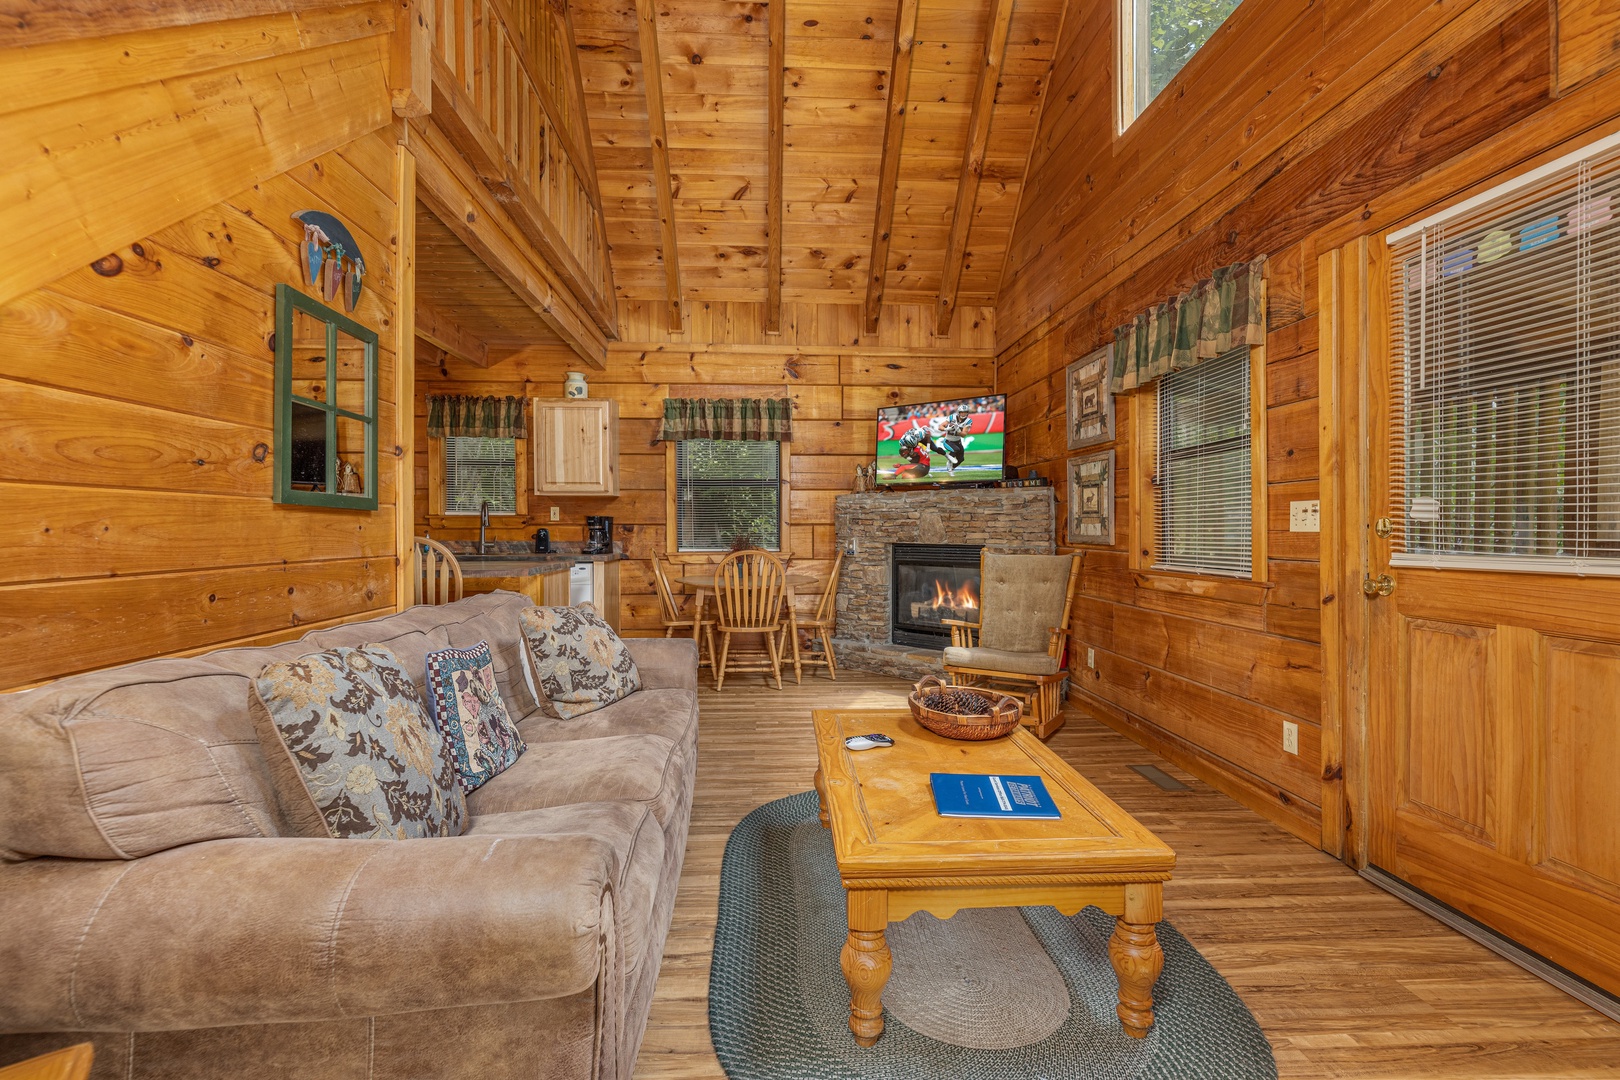 Living room with TV and fireplace at Walkin' To Gatlinburg, a 2 bedroom cabin rental located in Gatlinburg